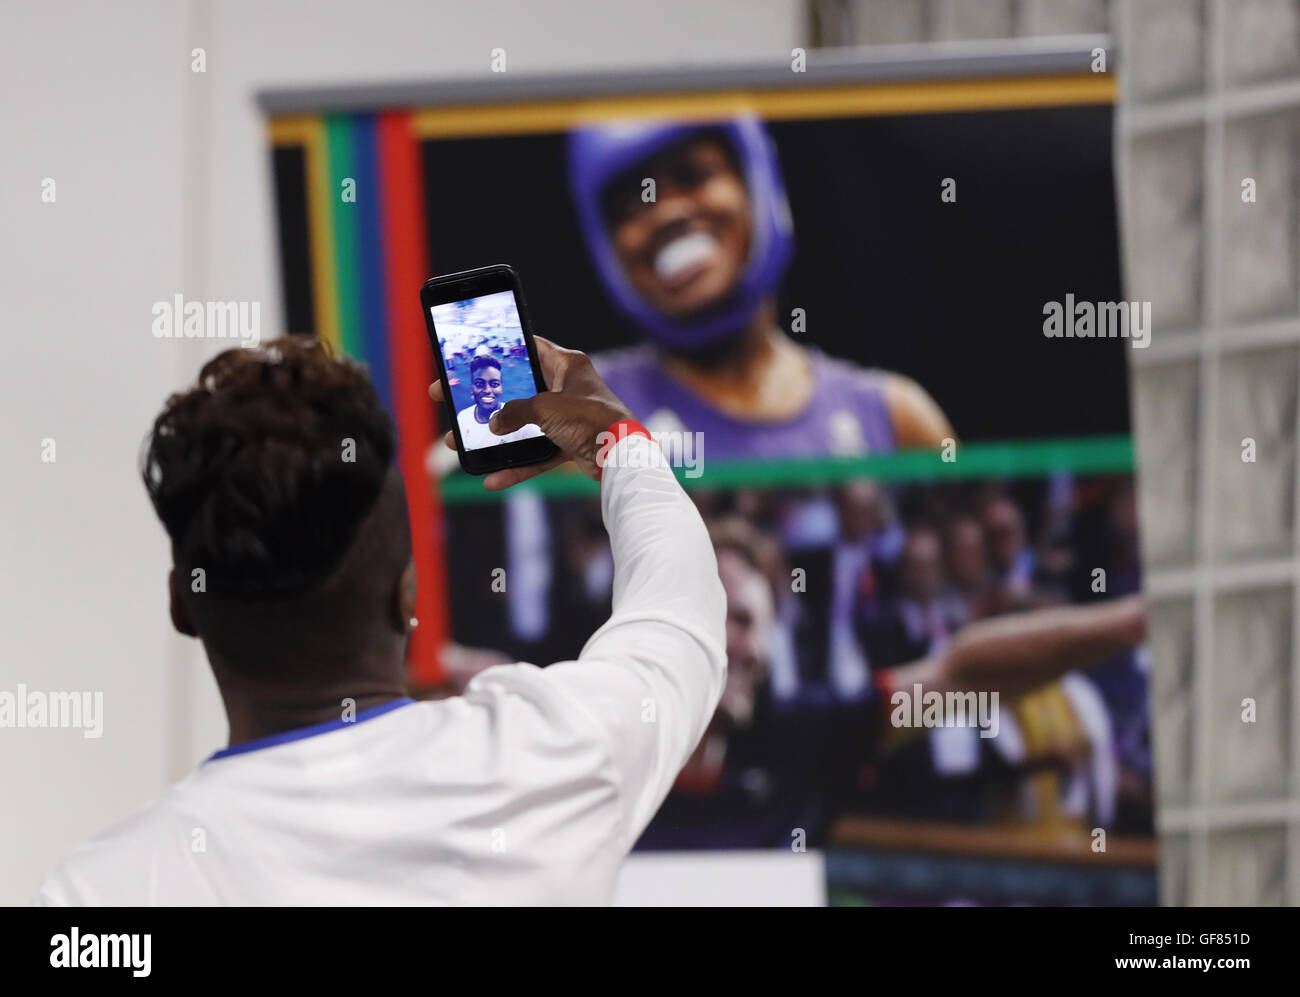 Nicola Adams takes a picture on her phone at the team training camp in Belo Horizonte, Brazil. PRESS ASSOCIATION Photo. Picture date: Friday July 29, 2016. Photo credit should read: Owen Humphreys/PA Wire. Stock Photo